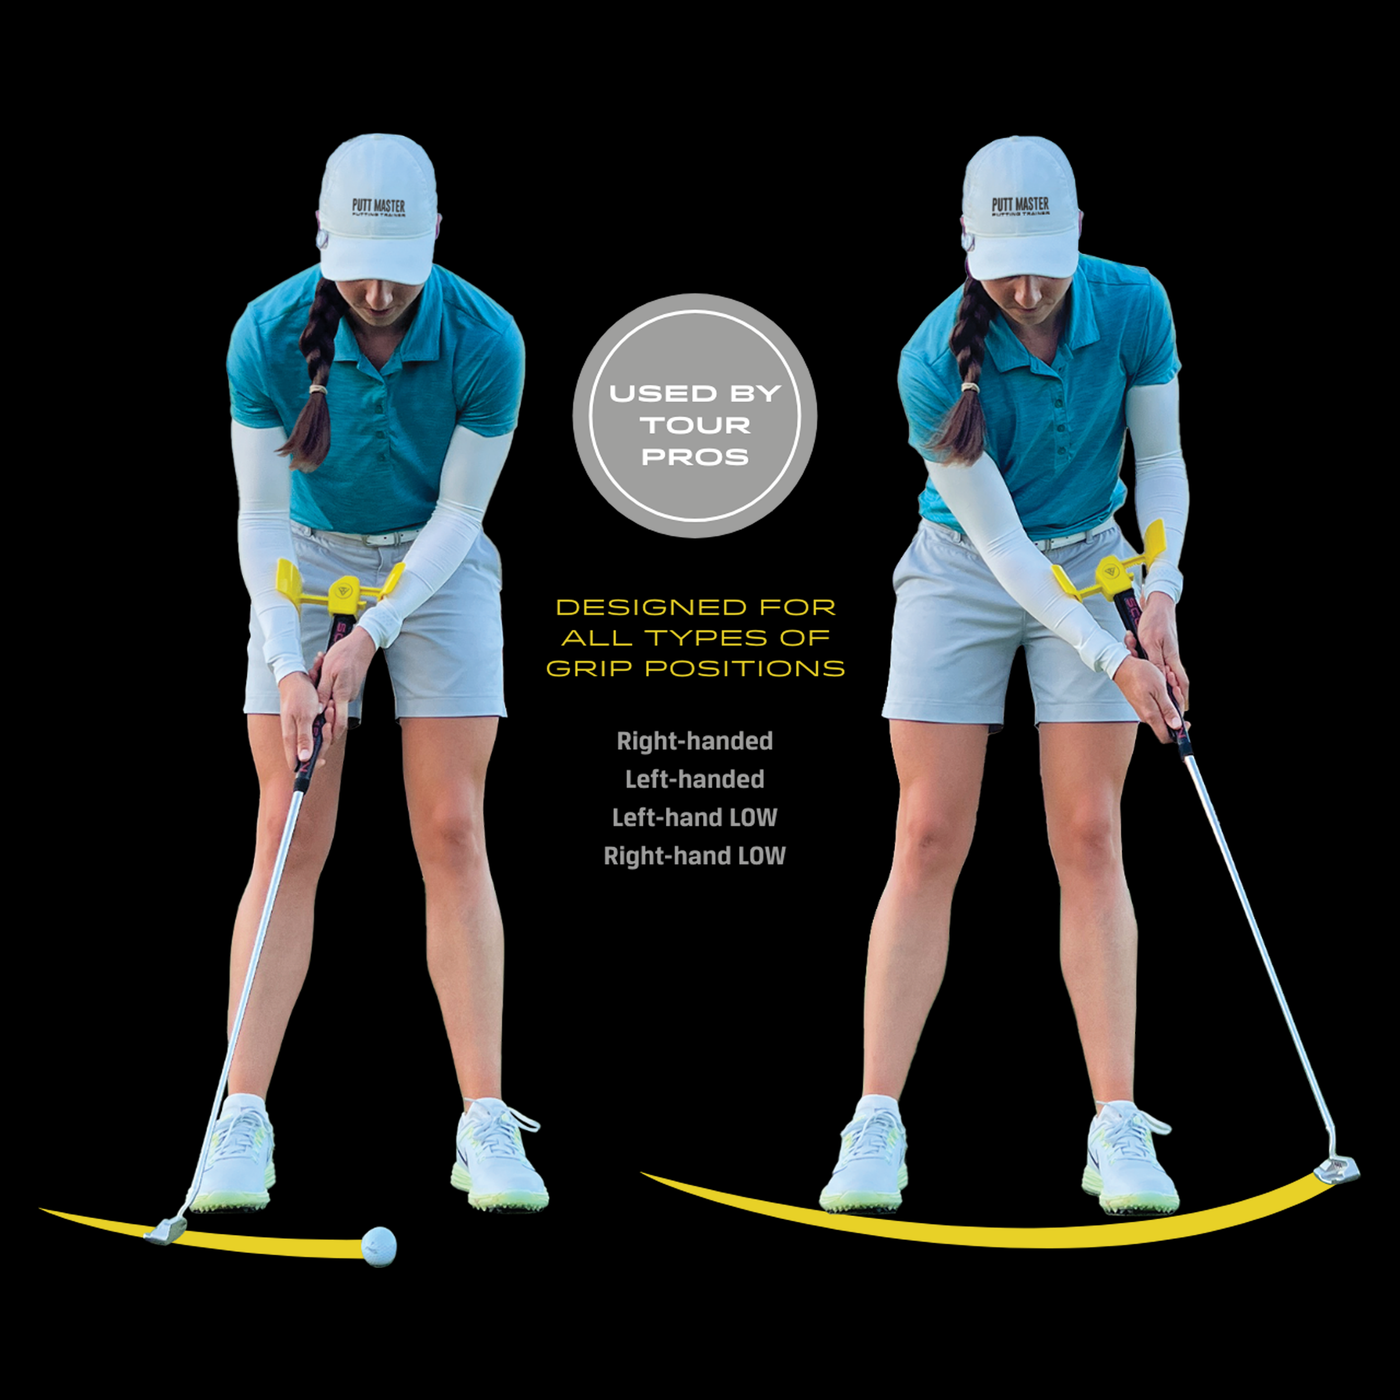 Putt Master Putting Trainer designed for all types of grip positions